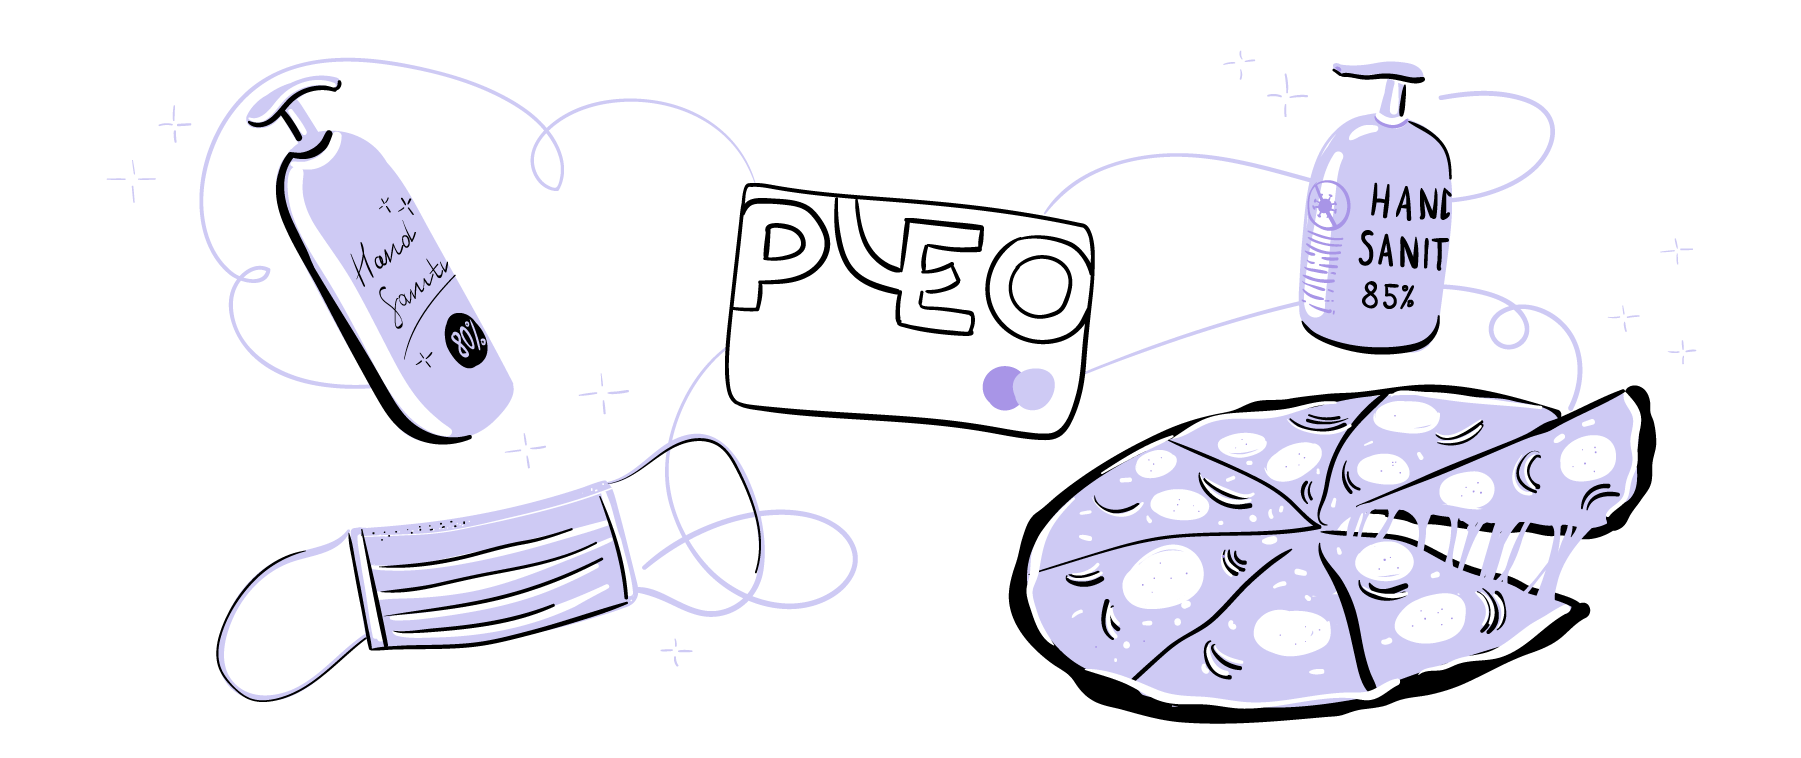 Buy whatever you need for your business with Pleo